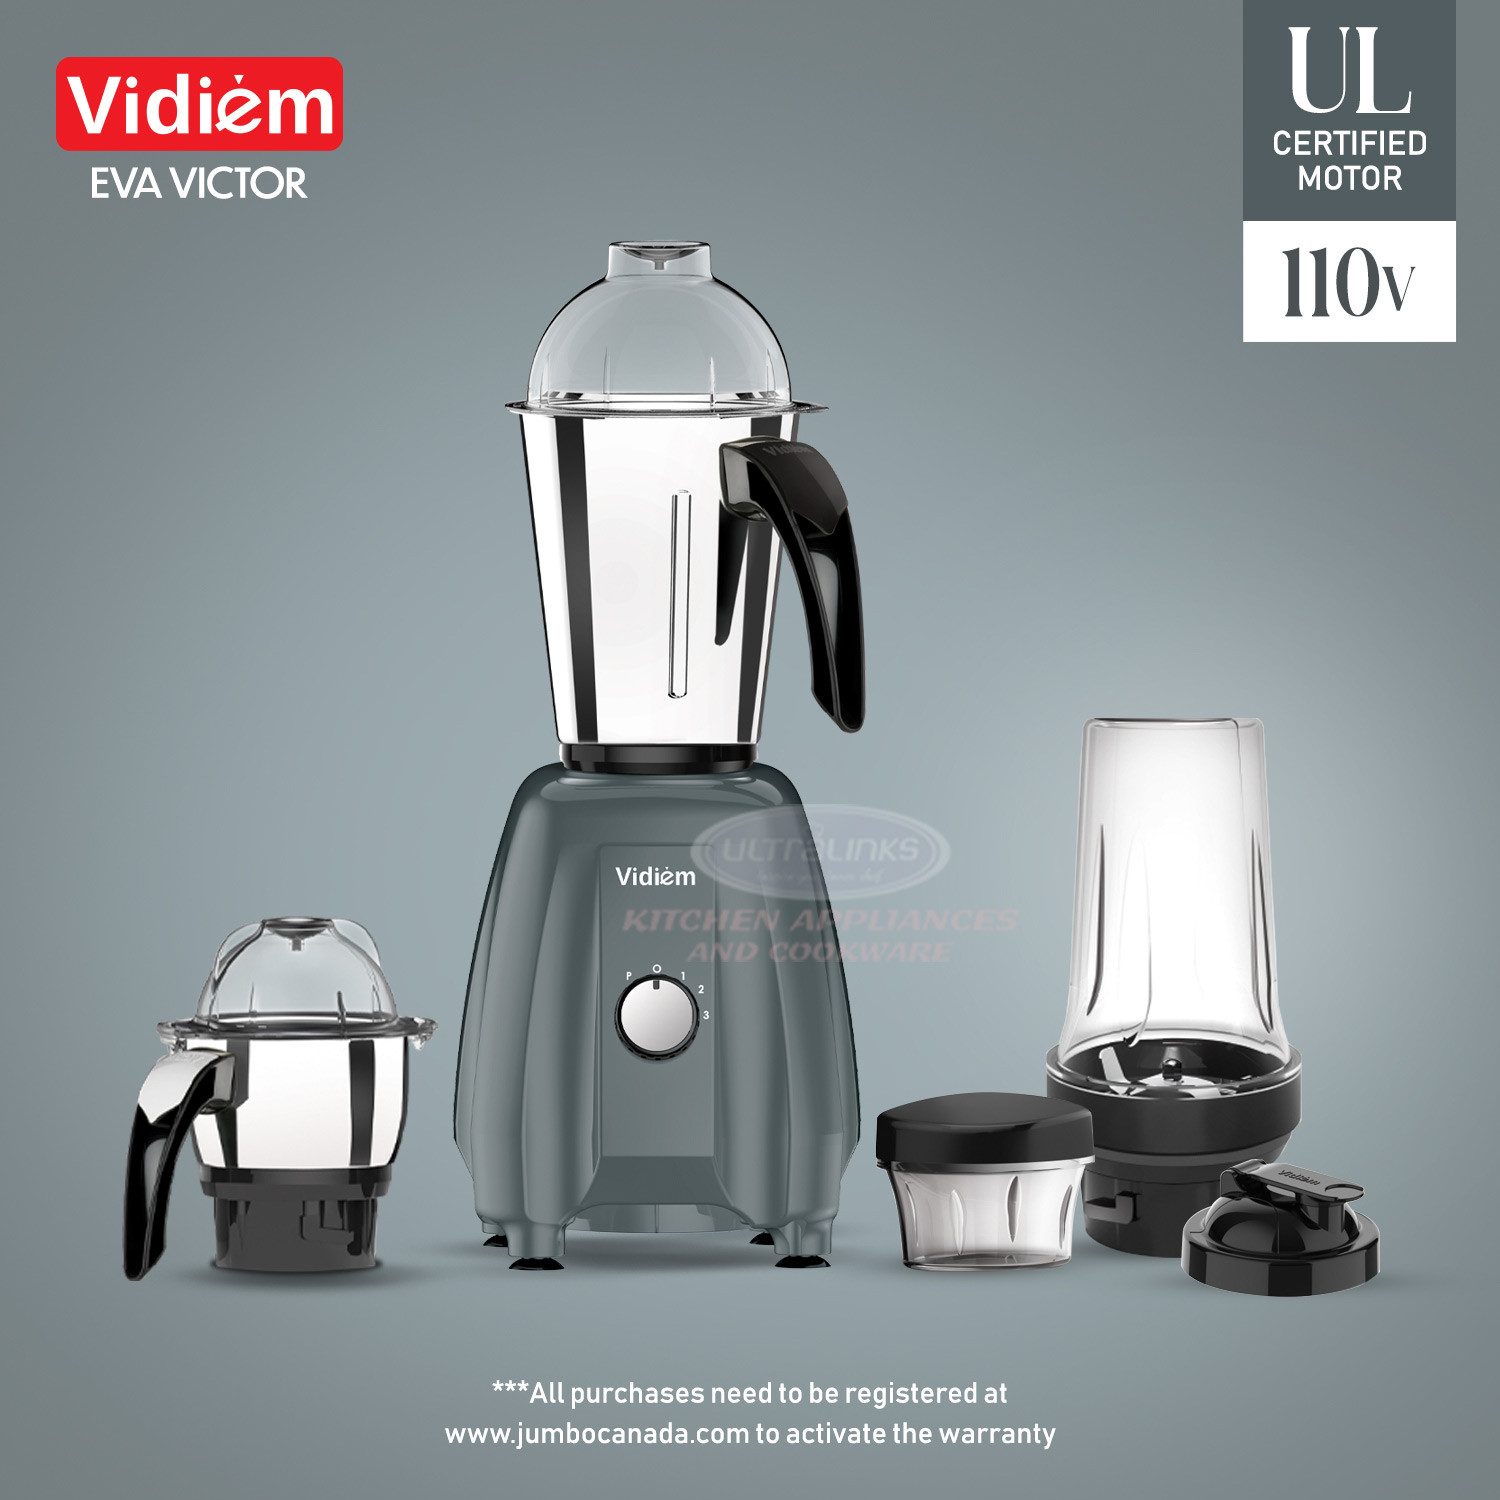 vidiem-eva-victor-pro-650w-110v-indian-mixer-grinder-ss-jars-250ml-spice-personal-coffee-herbs-grinder-with-500ml-personal-juices-shakes-smoothie-blender-made-for-canada-usa